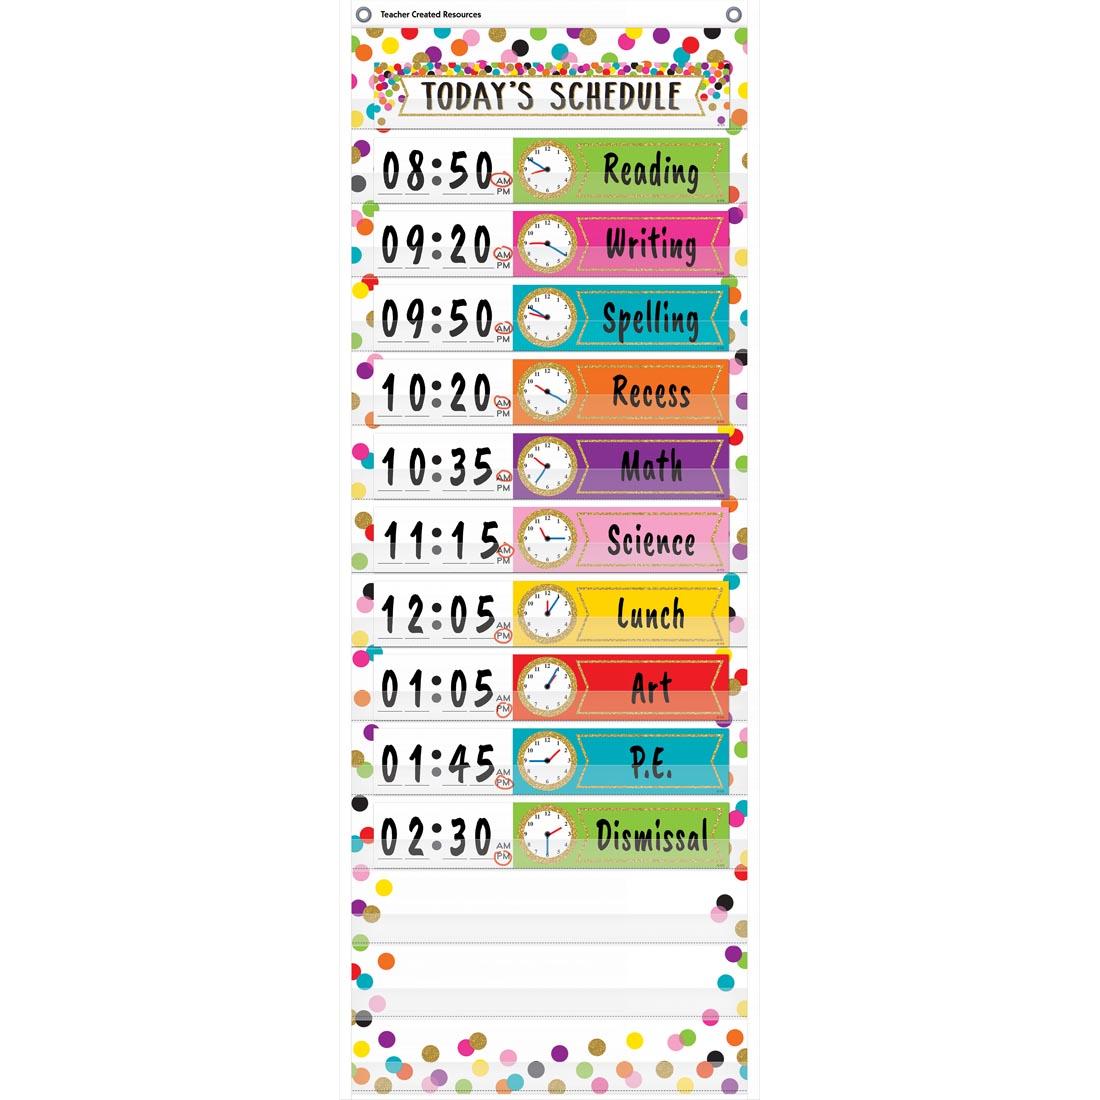 Confetti 14-Pocket Daily Schedule Pocket Chart By Teacher Created Resources with activities and times written in